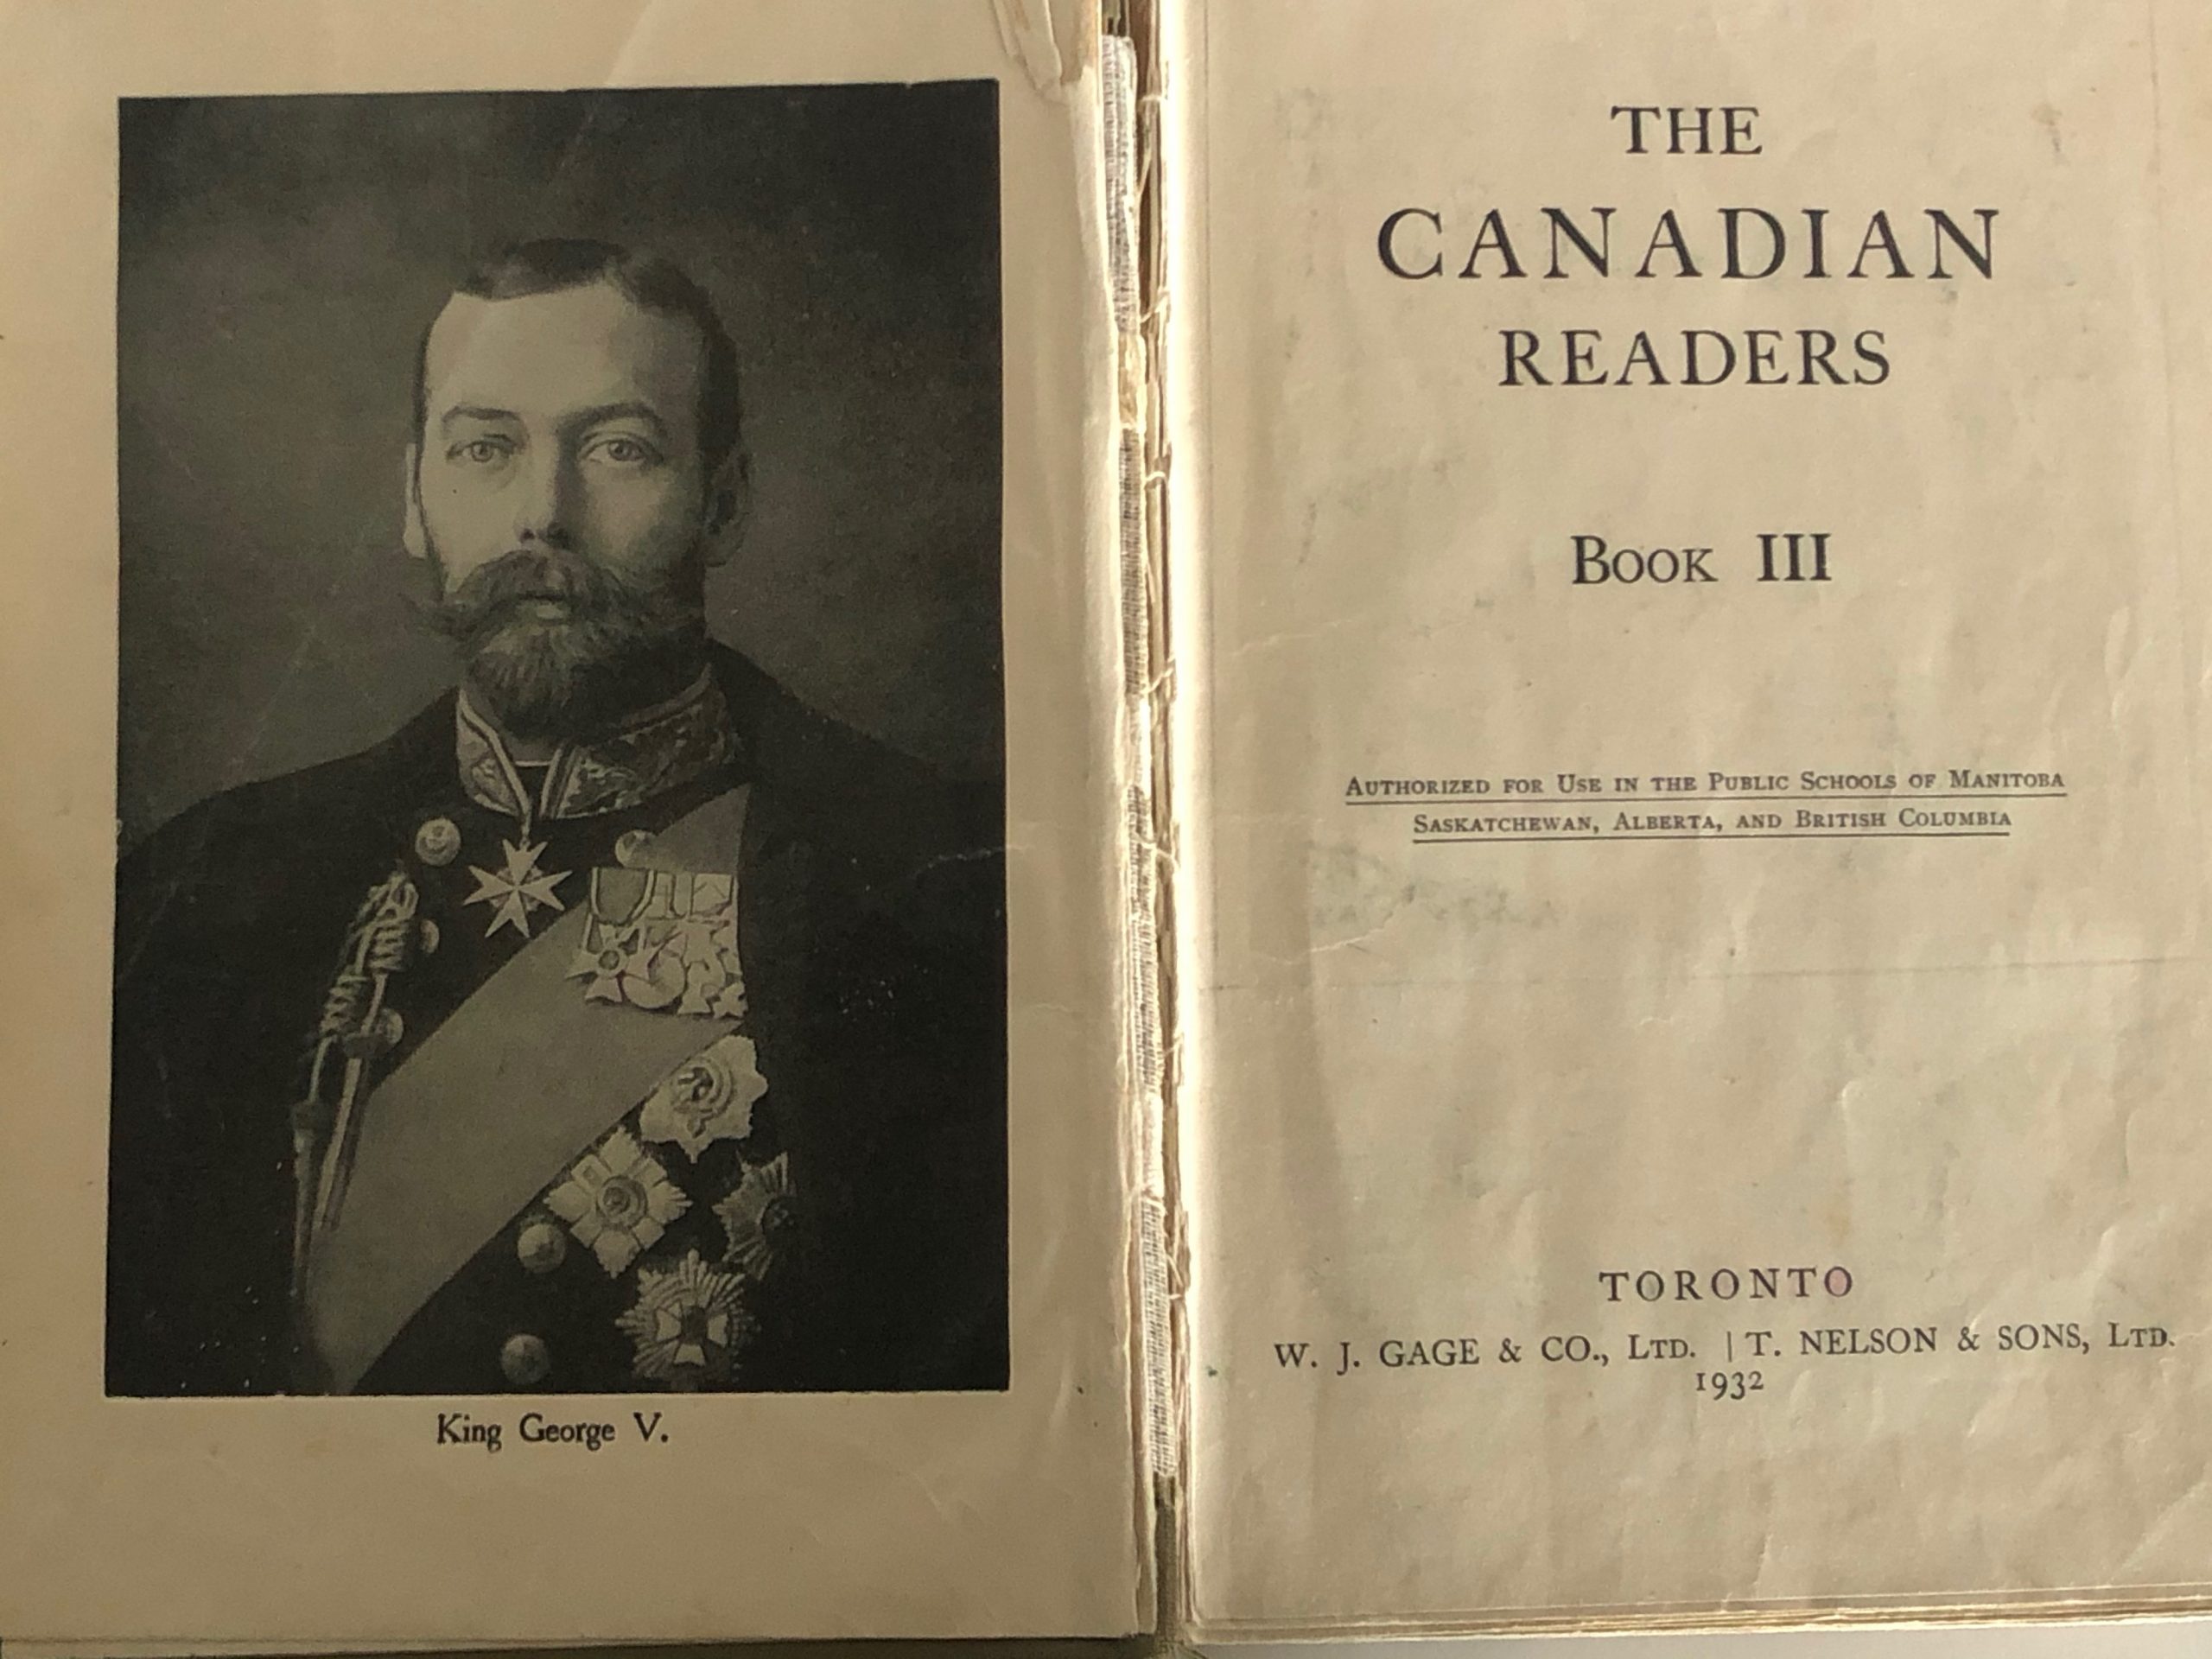 Open 1932 Canadian Reader, Book III, King George on left. Right page authorizes use for Western provinces from BC to Manitoba